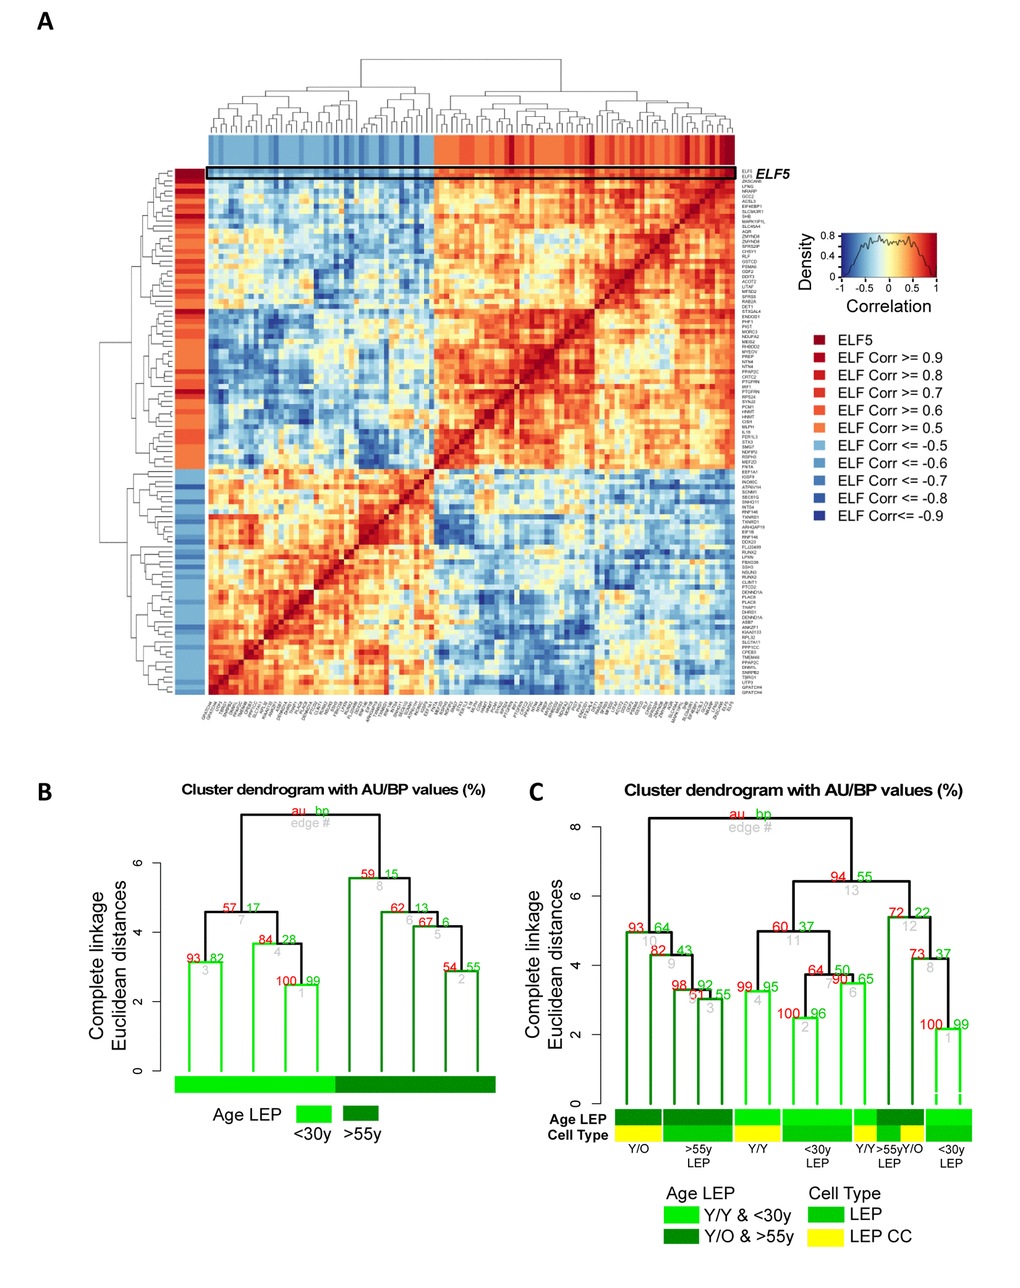 Microenvironment-imposed reduction of ELF5 causes an entire network of genes to change. Age-related changes in ELF5 are associated with age-specific changes in ELF5-target genes in LEP lineage. (A) Gene-gene correlation matrix of ELF5 (2 gene probes) and 92 ELF5-target genes (103 gene probes) found to have absolute correlation ≥ 0.5 with ELF5 in LEP from 55y age groups across 9 HMEC strains. Annotated in both the row and column bars of the correlation matrix are each ELF5-target gene probe’s correlation value to the ELF5 probes. (B) Hierarchical clustering based on log2 expression levels of ELF5 and the anti-/correlated ELF5-target genes in 55y 4p pre-stasis LEP, (C) and in Y/Y (n=3) and Y/O (n=3) co-cultures with 55y (n=4) 4p LEP isogenic to the MEP strains used in co-culture using Euclidean distance measures and complete linkage. Percent Approximately Unbiased (AU) p-values are denoted in red, and percent Bootstrap Probability (BP) in green are calculated and annotated above each cluster.